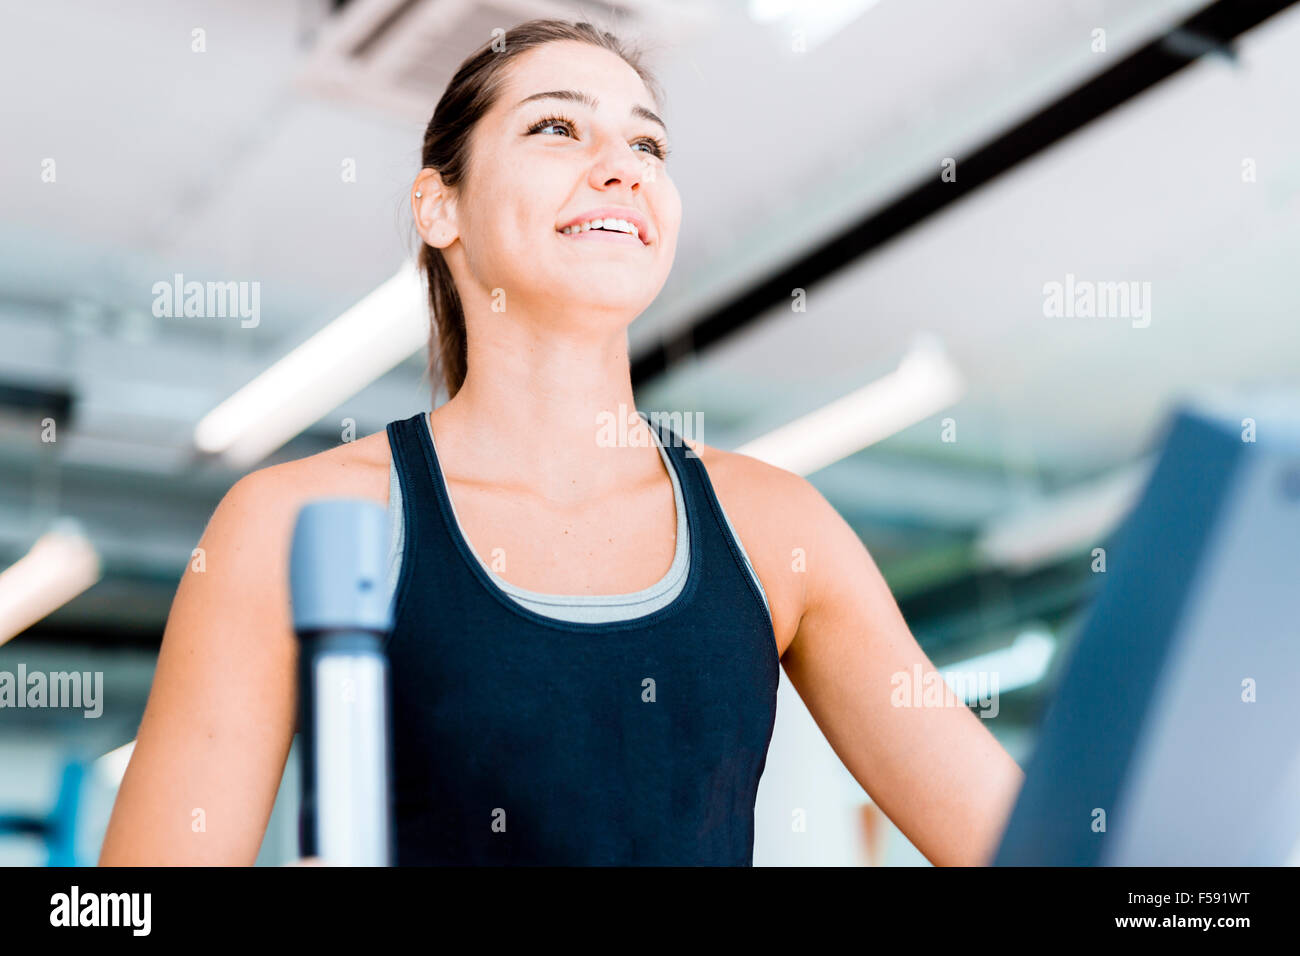 Beautiful young lady using the elliptical trainer in a gym in a ...